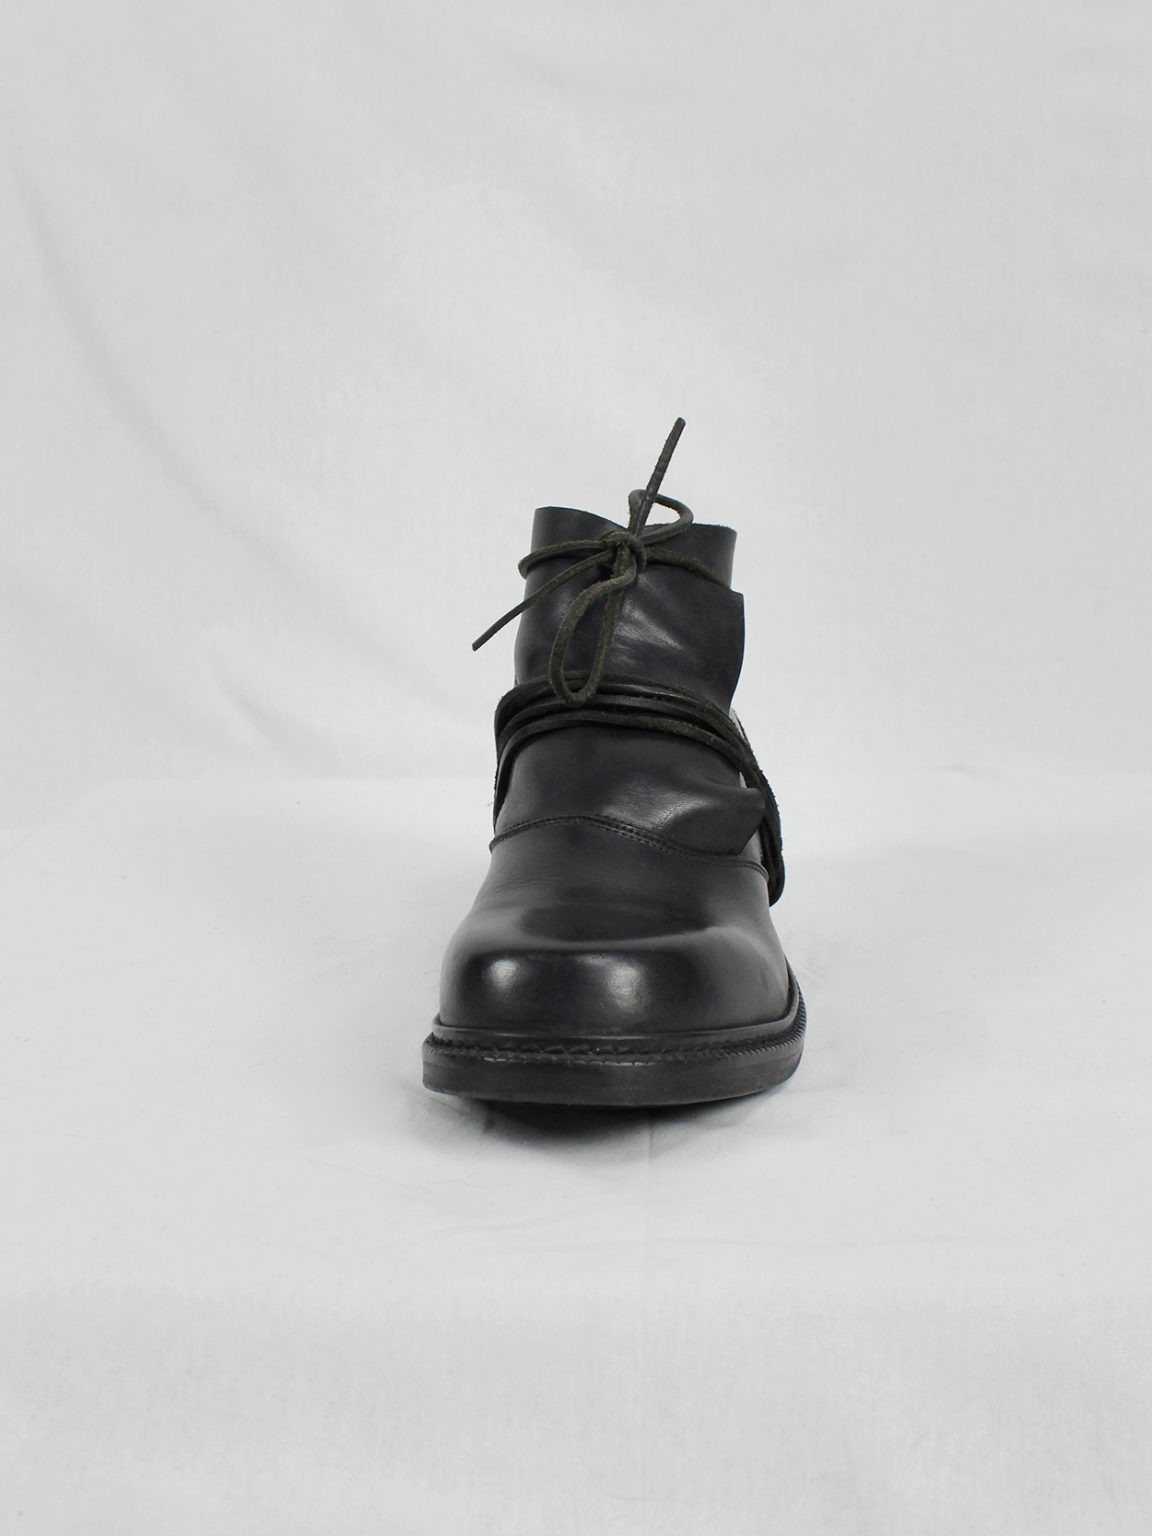 Dirk Bikkembergs black boots with flap and laces through the soles (41) — late 90's